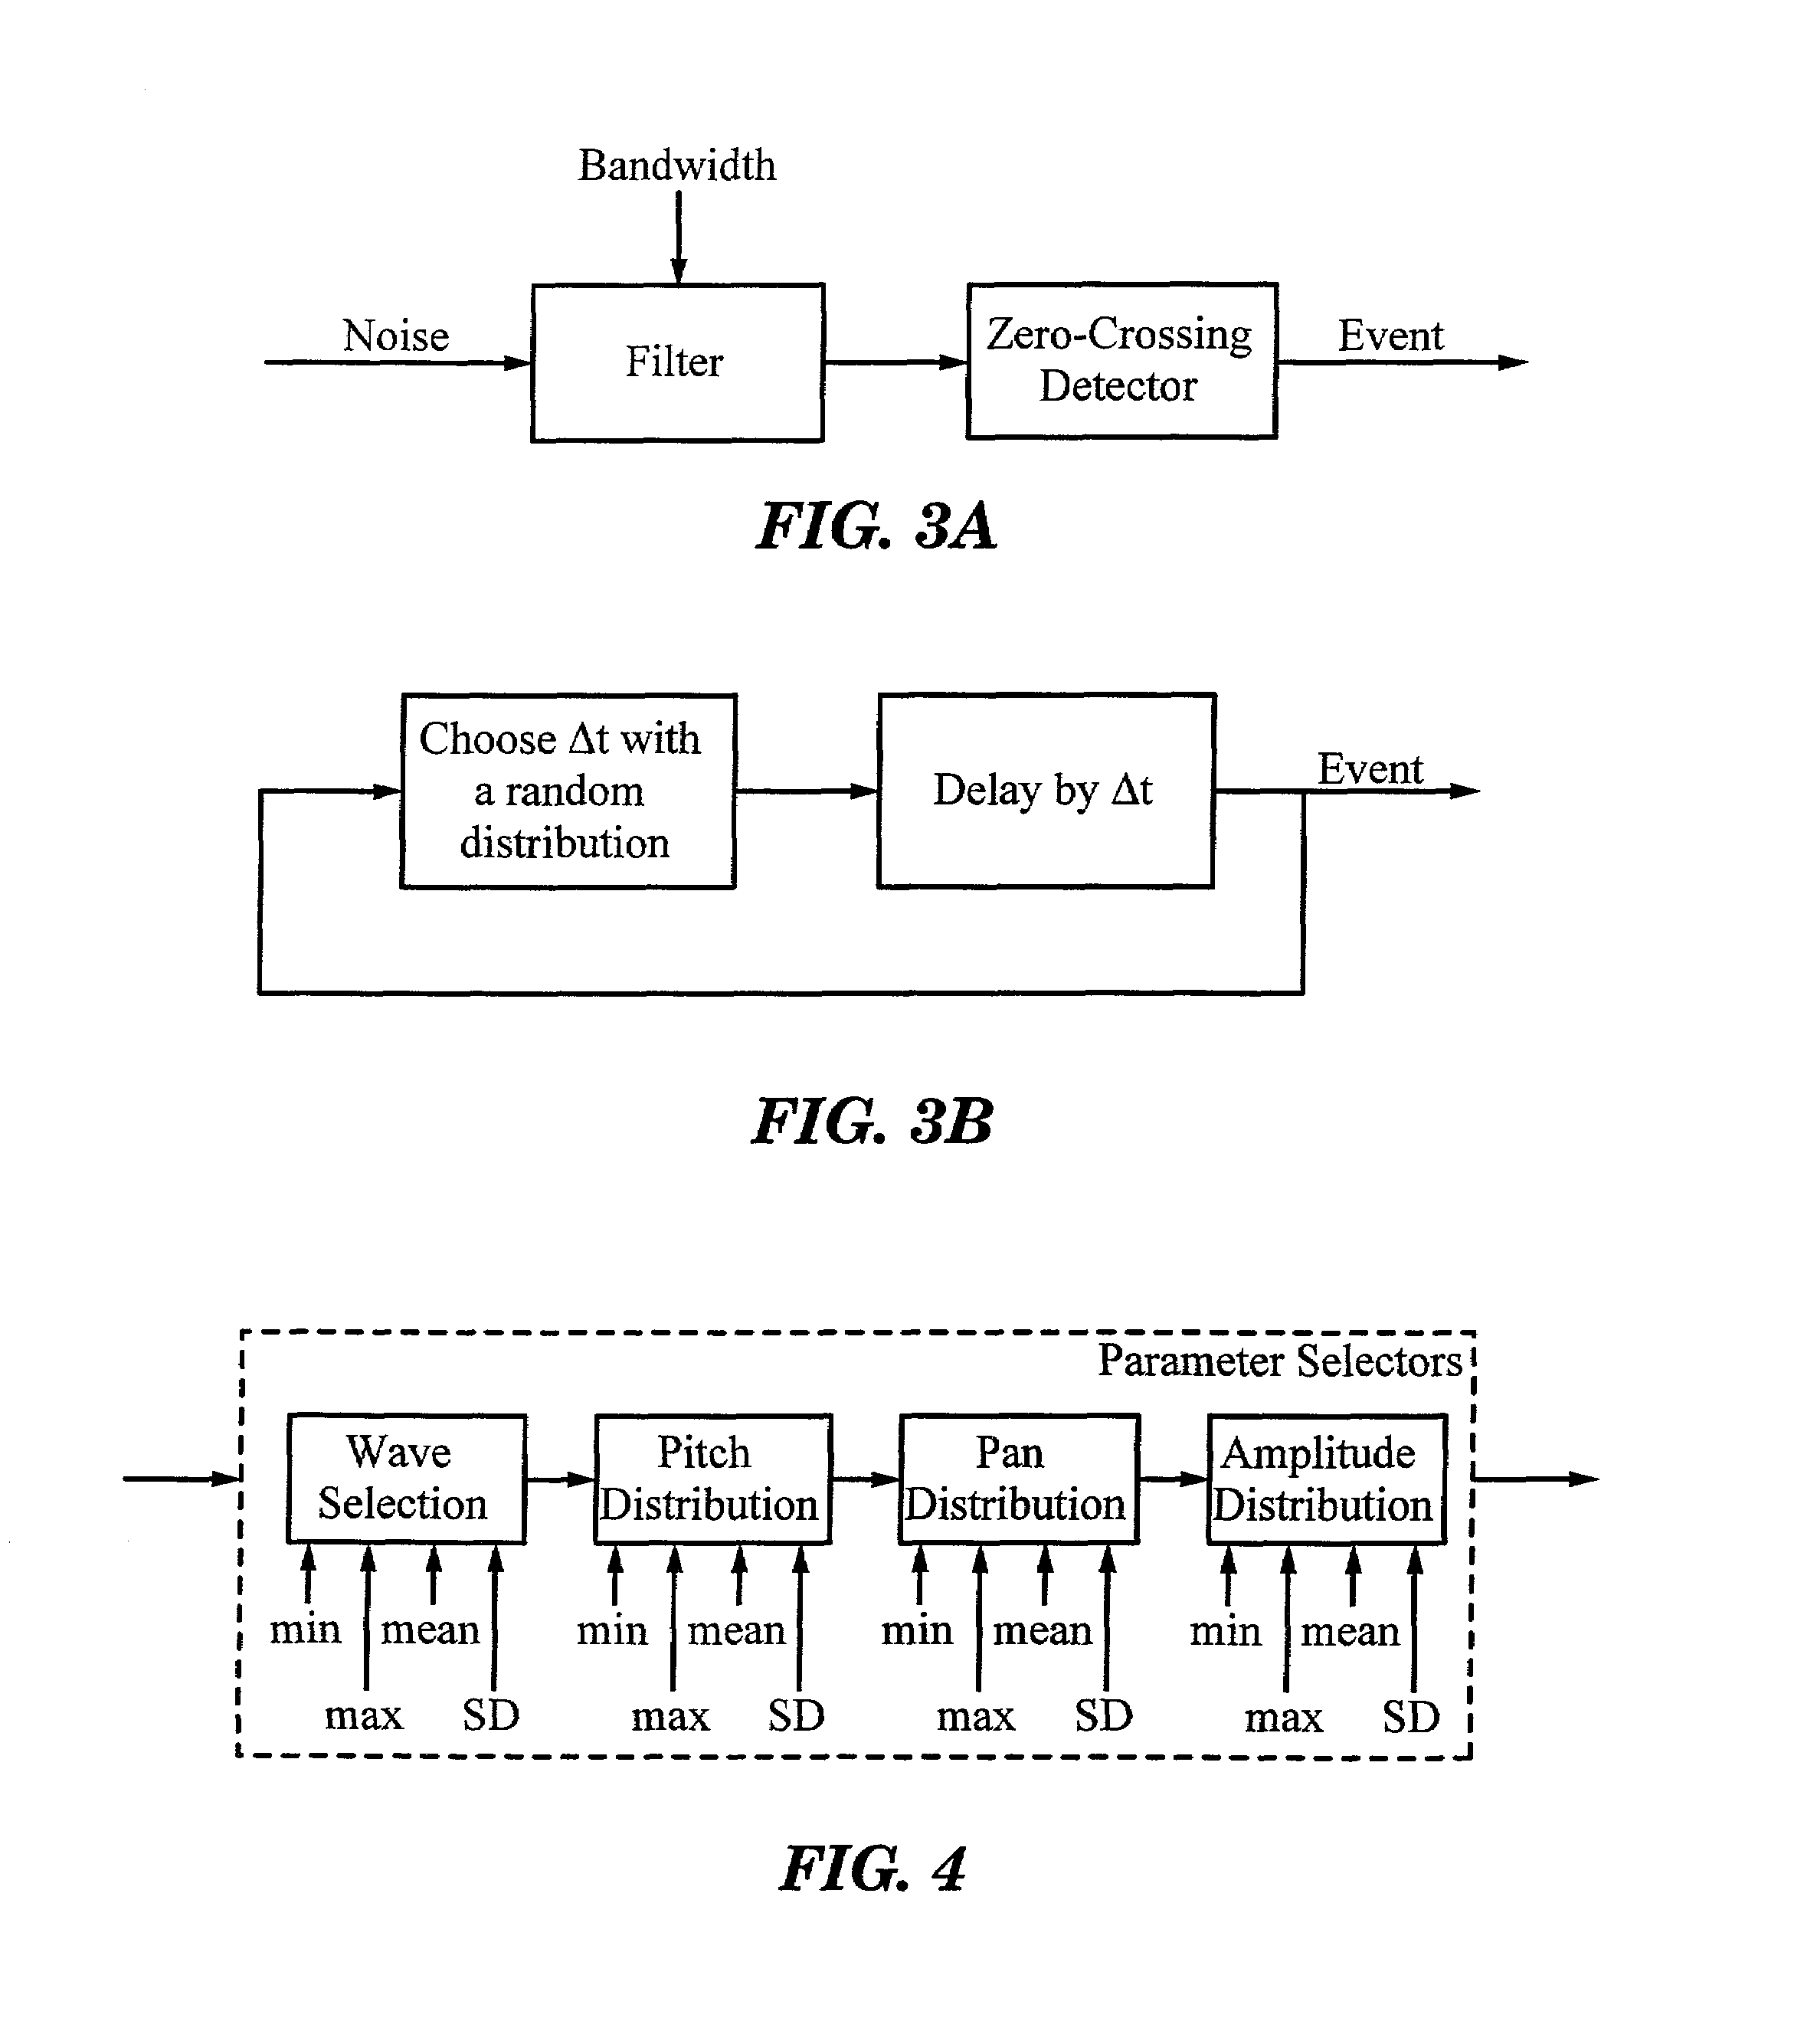 Statistical sound event modeling system and methods